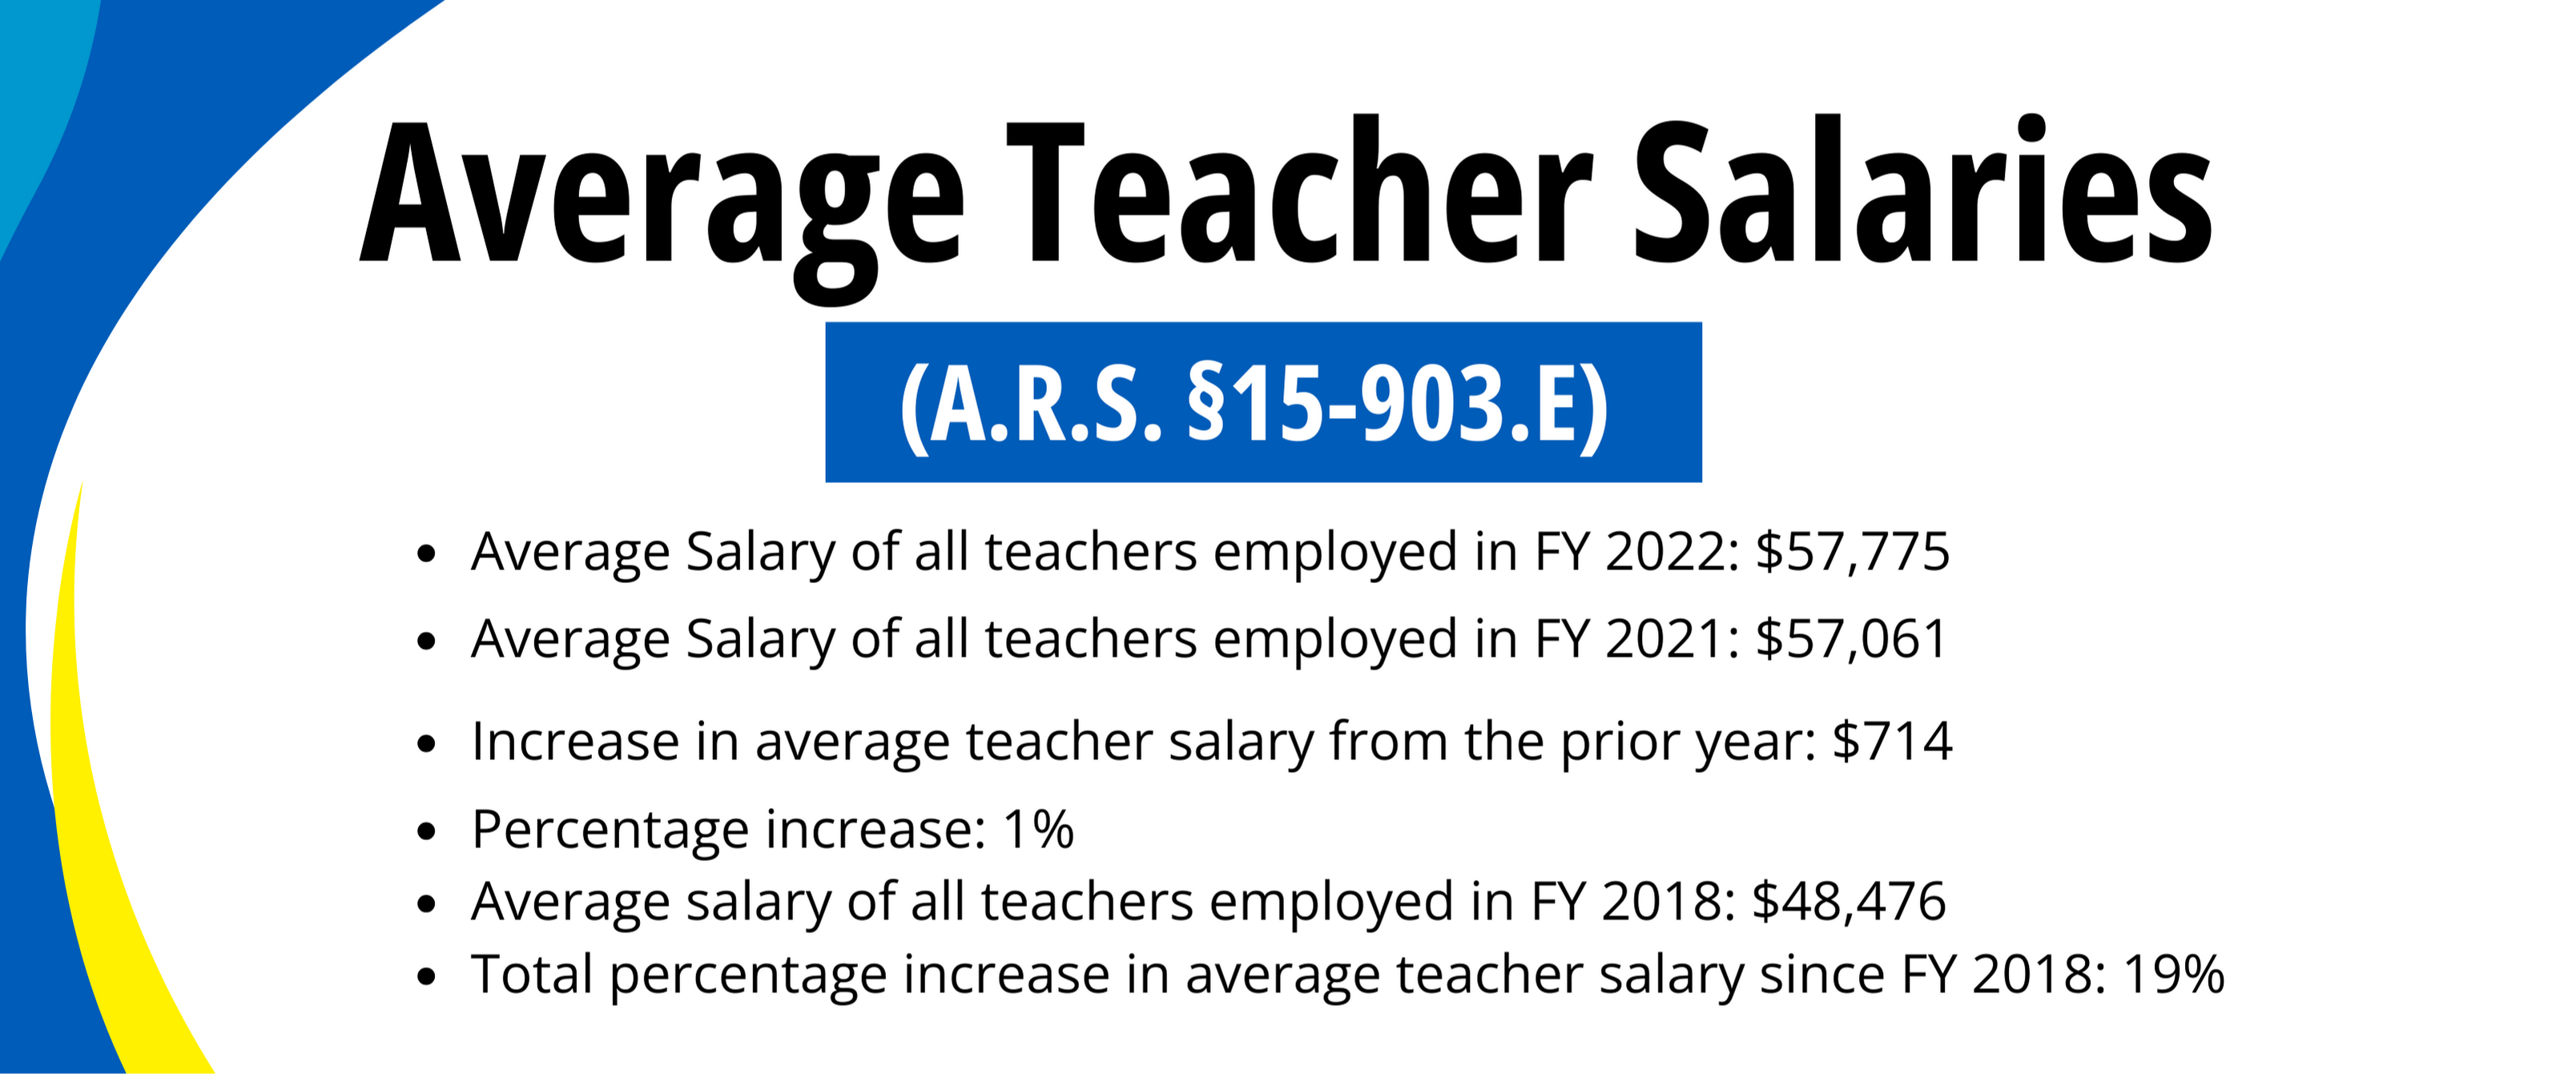 Average Teacher Salaries, (A.R.S. §15-903.E),Average Salary of all teachers employed in FY 2022: $57,775 Average Salary of all teachers employed in FY 2021: $57,061 Increase in average teacher salary from the prior year: $714 Percentage increase: 1% Average salary of all teachers employed in FY 2018: $48,476 Total percentage increase in average teacher salary since FY 2018: 19% 